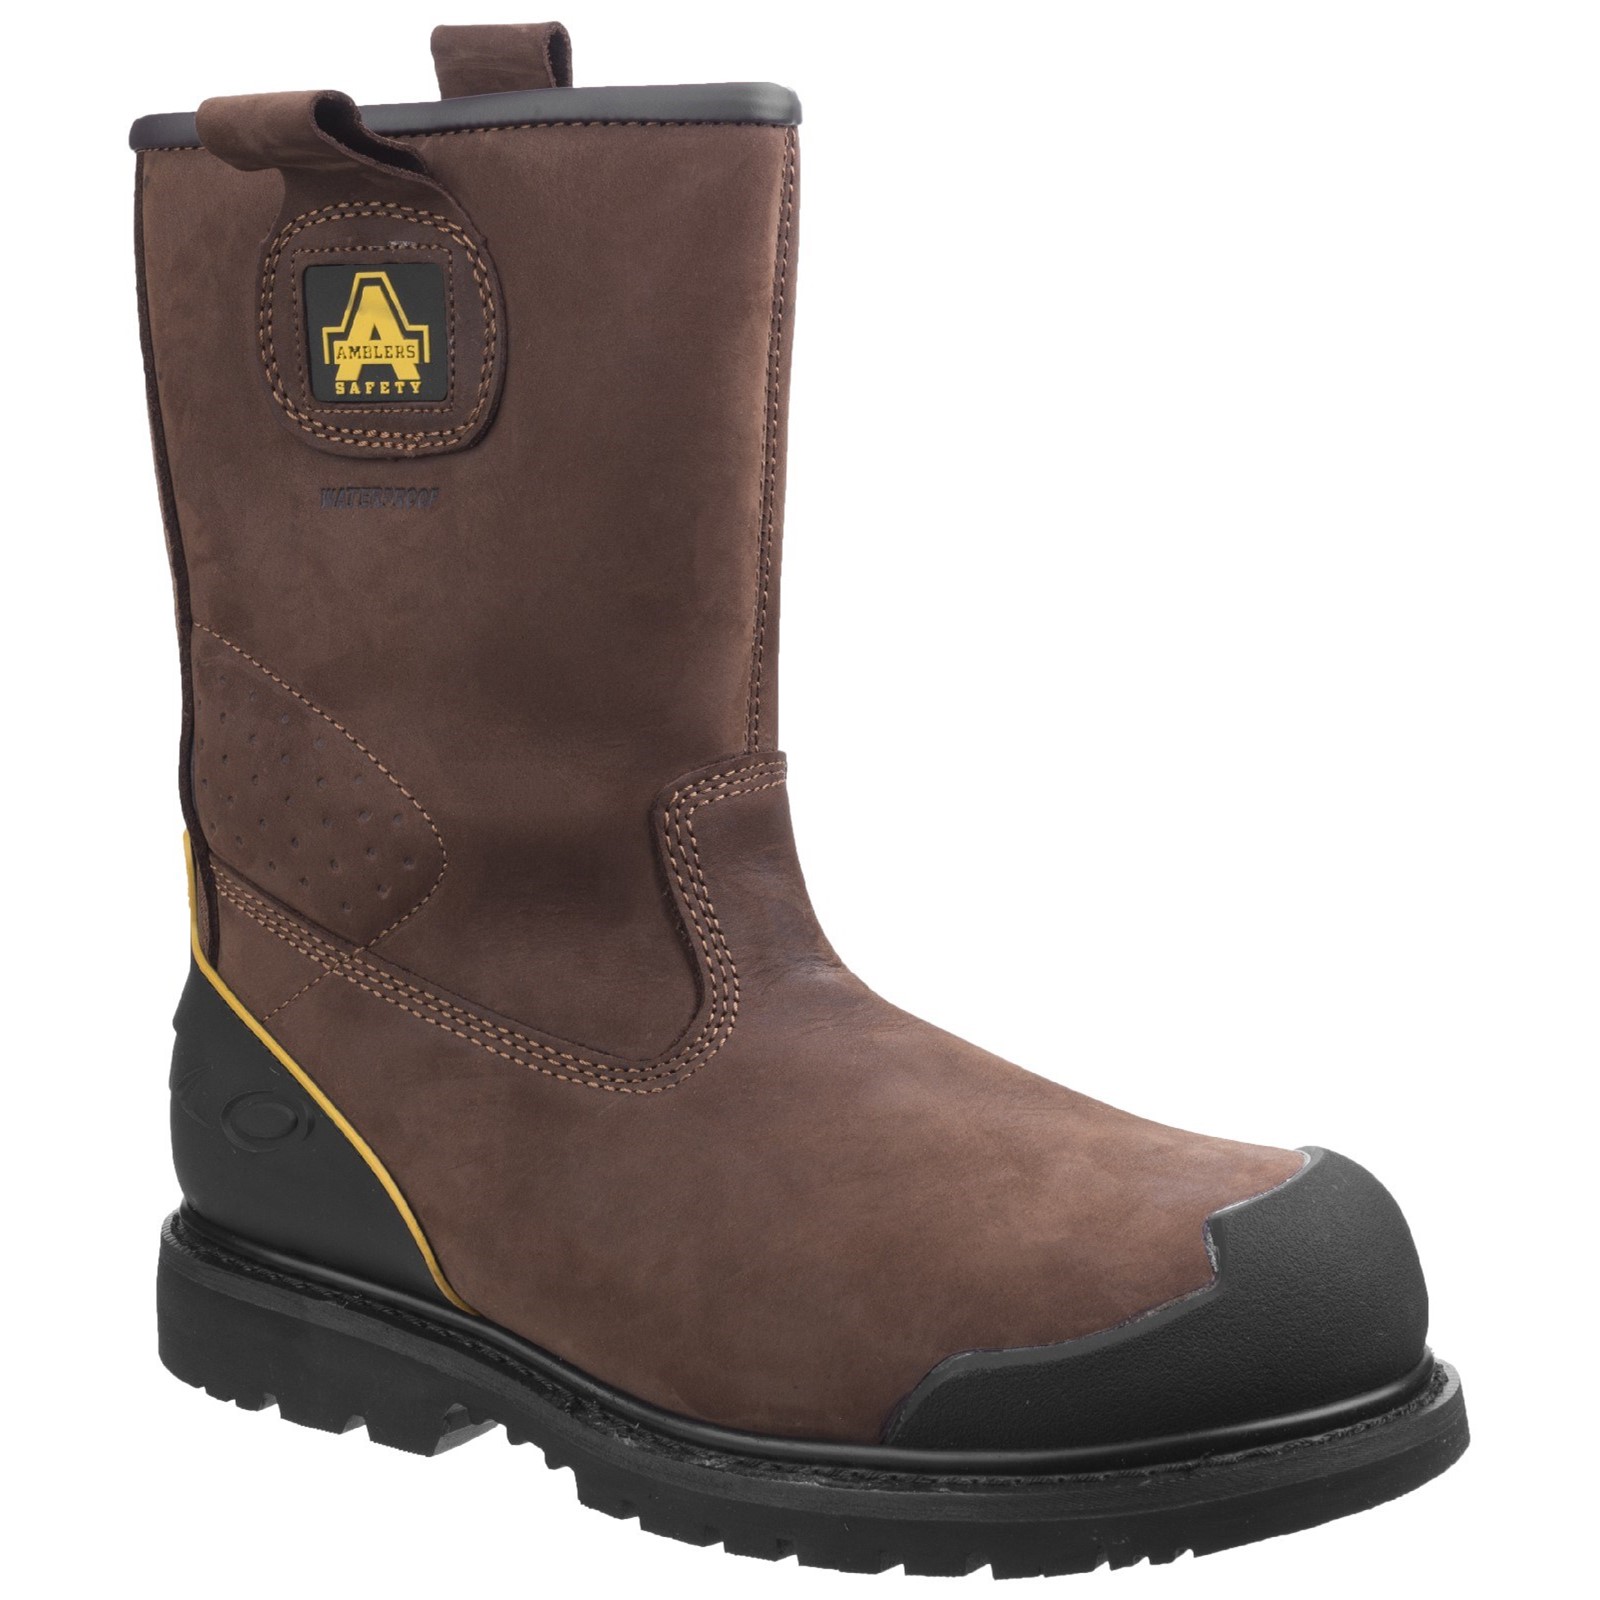 FS223 Goodyear Welted Waterproof Pull on Industrial Safety Boot